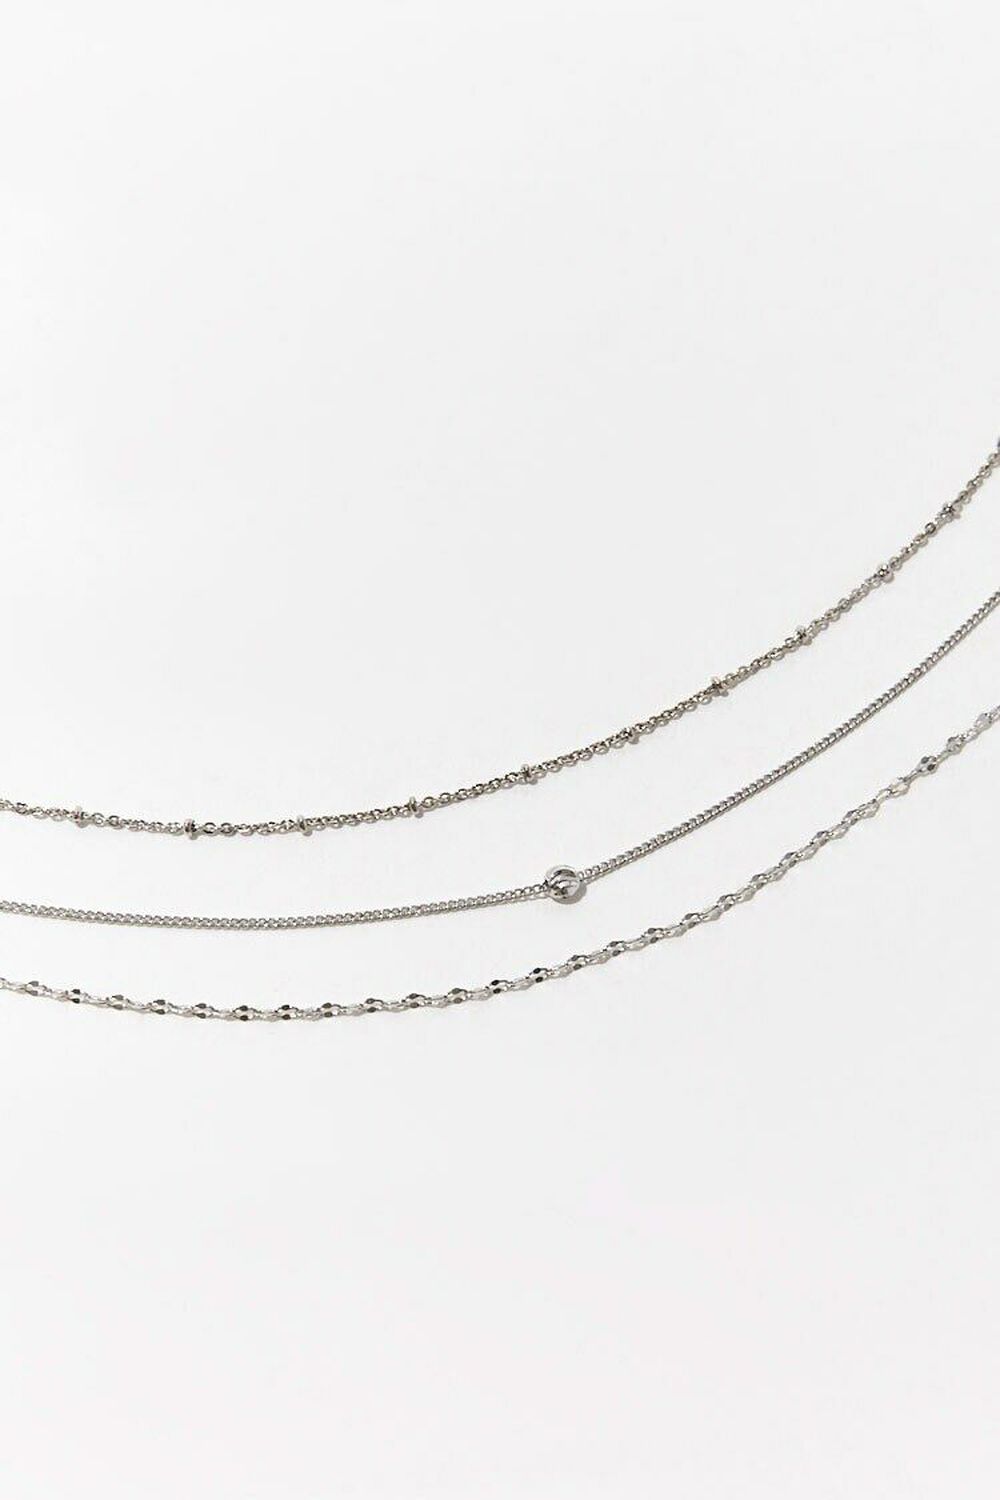 SILVER Assorted Chain Anklet Set, image 1